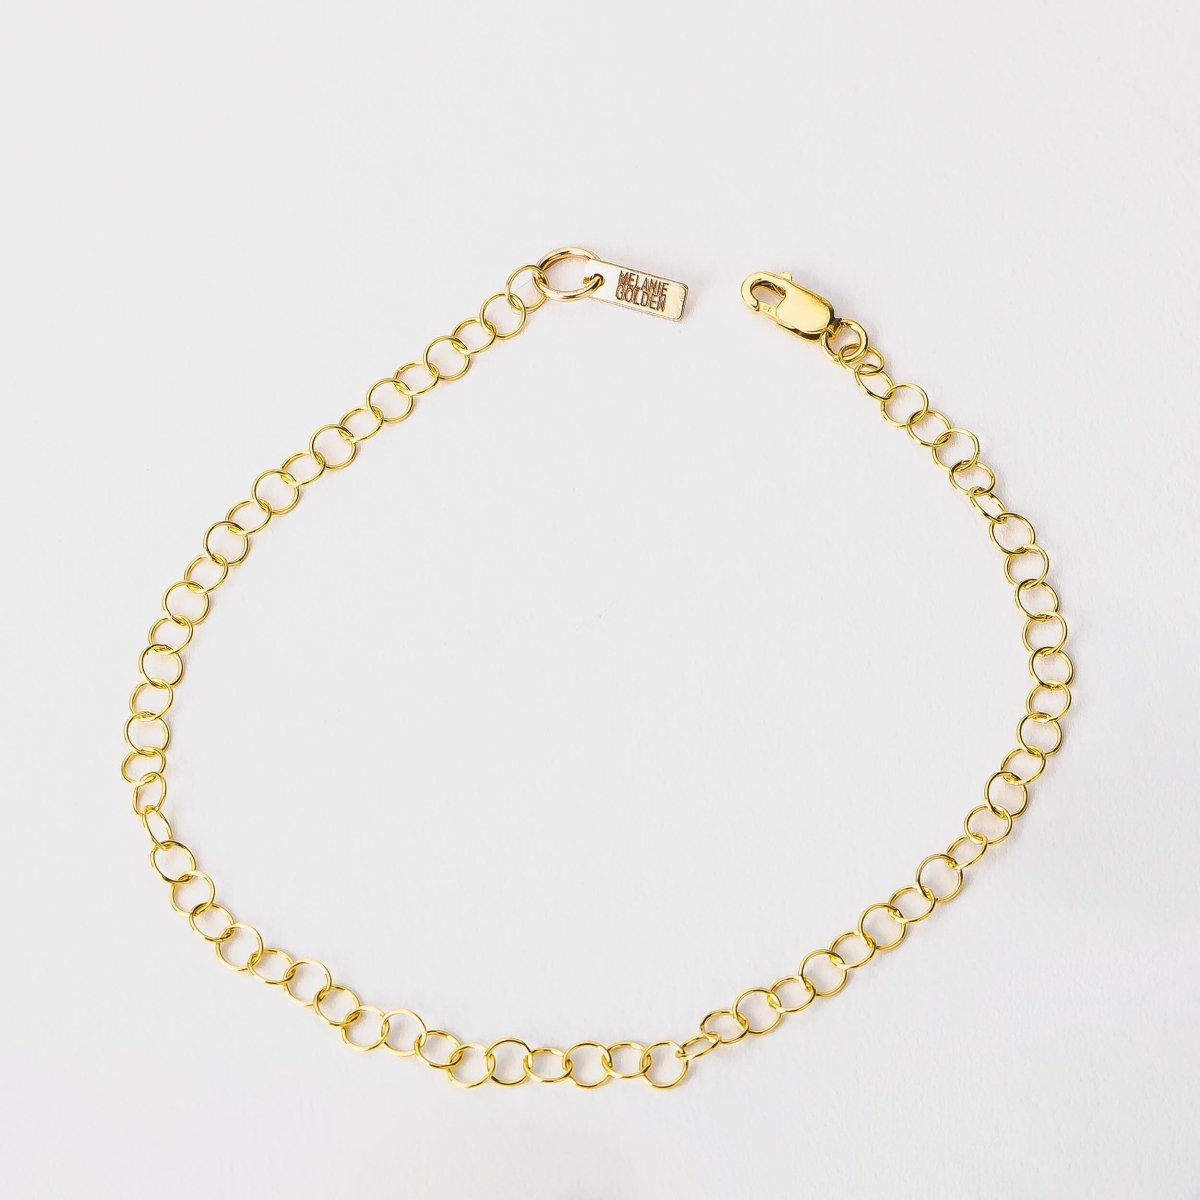 Celine Gold Curb Chain Bracelet  Rent Celine jewelry for $55/month